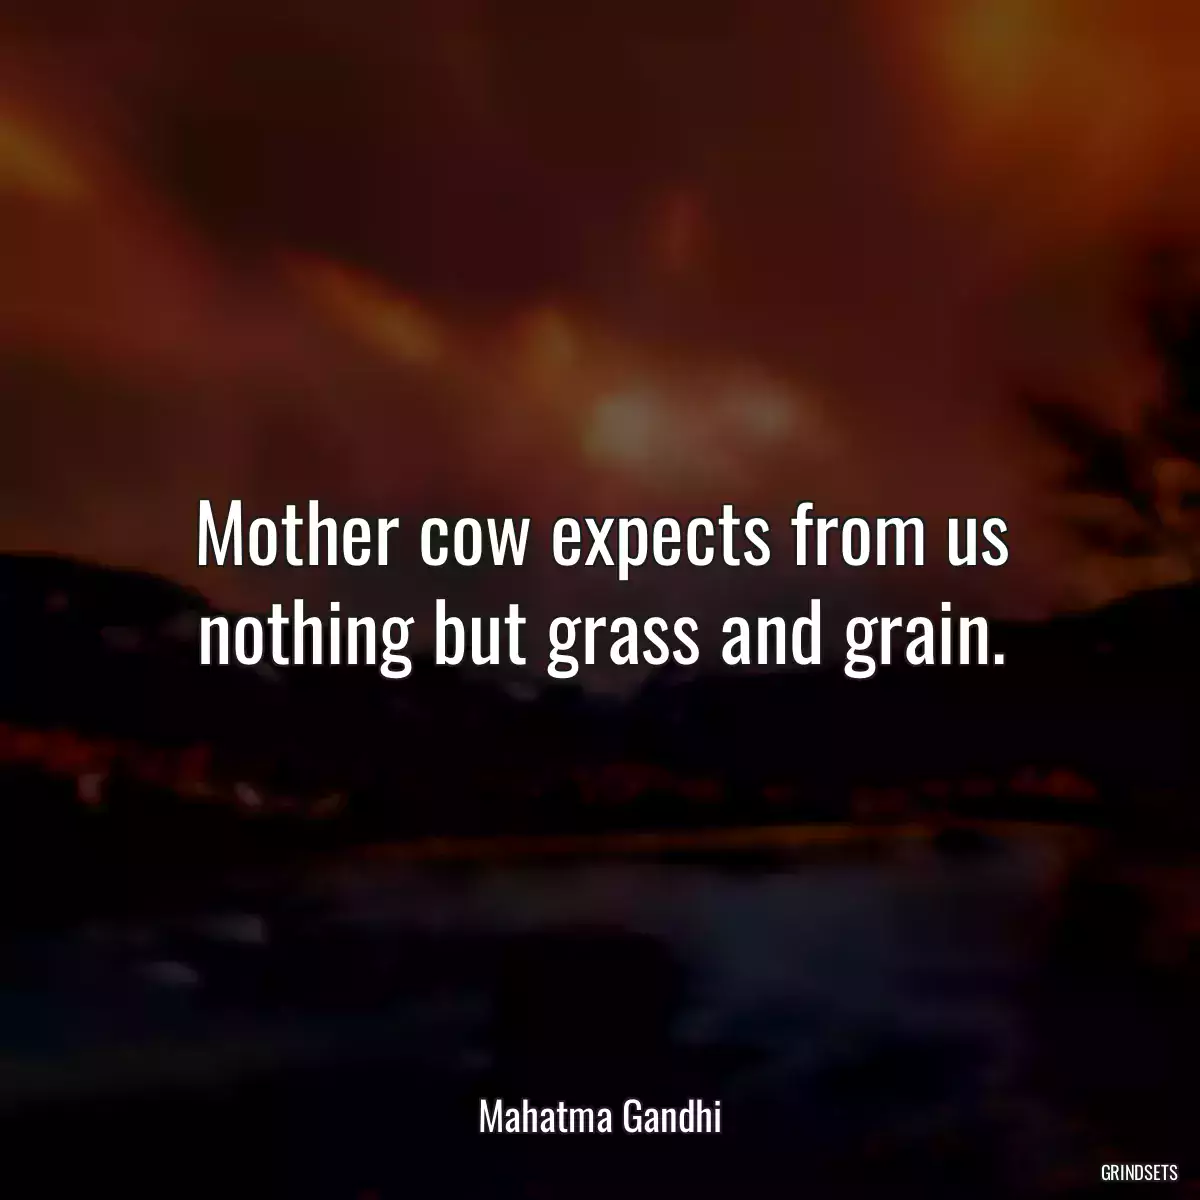 Mother cow expects from us nothing but grass and grain.